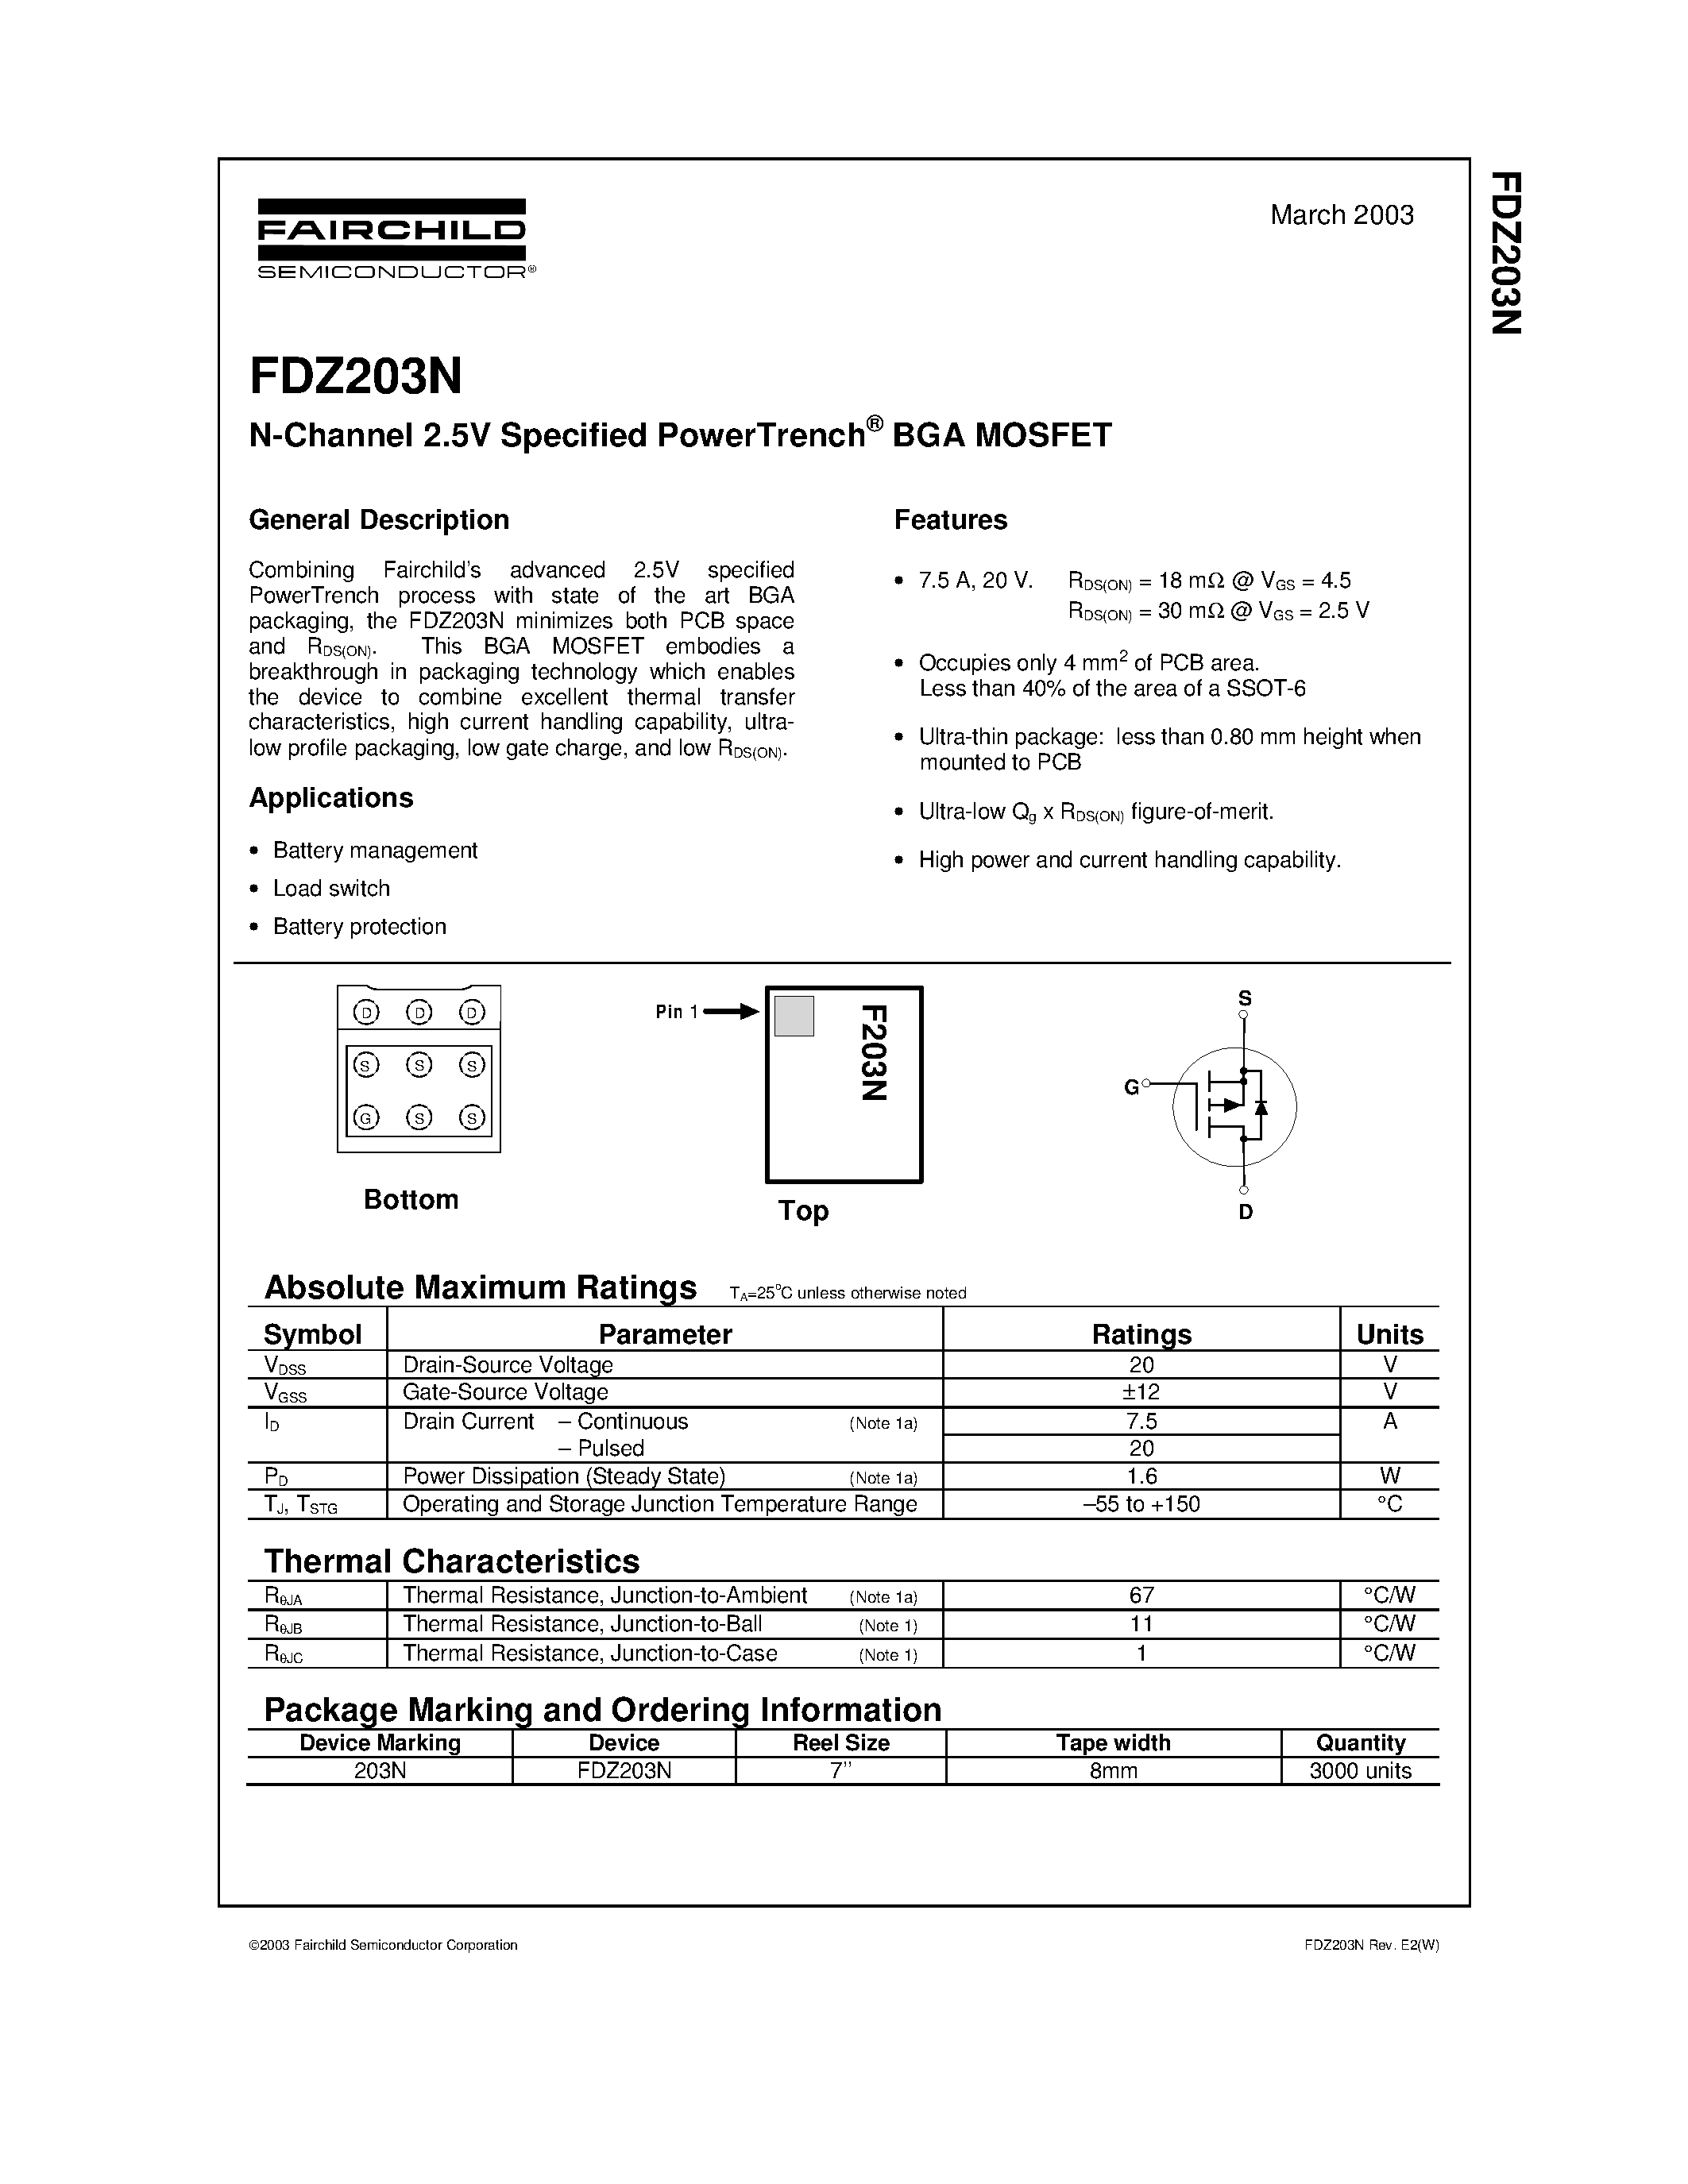 Datasheet FDZ203N - N-Channel 2.5V Specified PowerTrench BGA MOSFET page 1